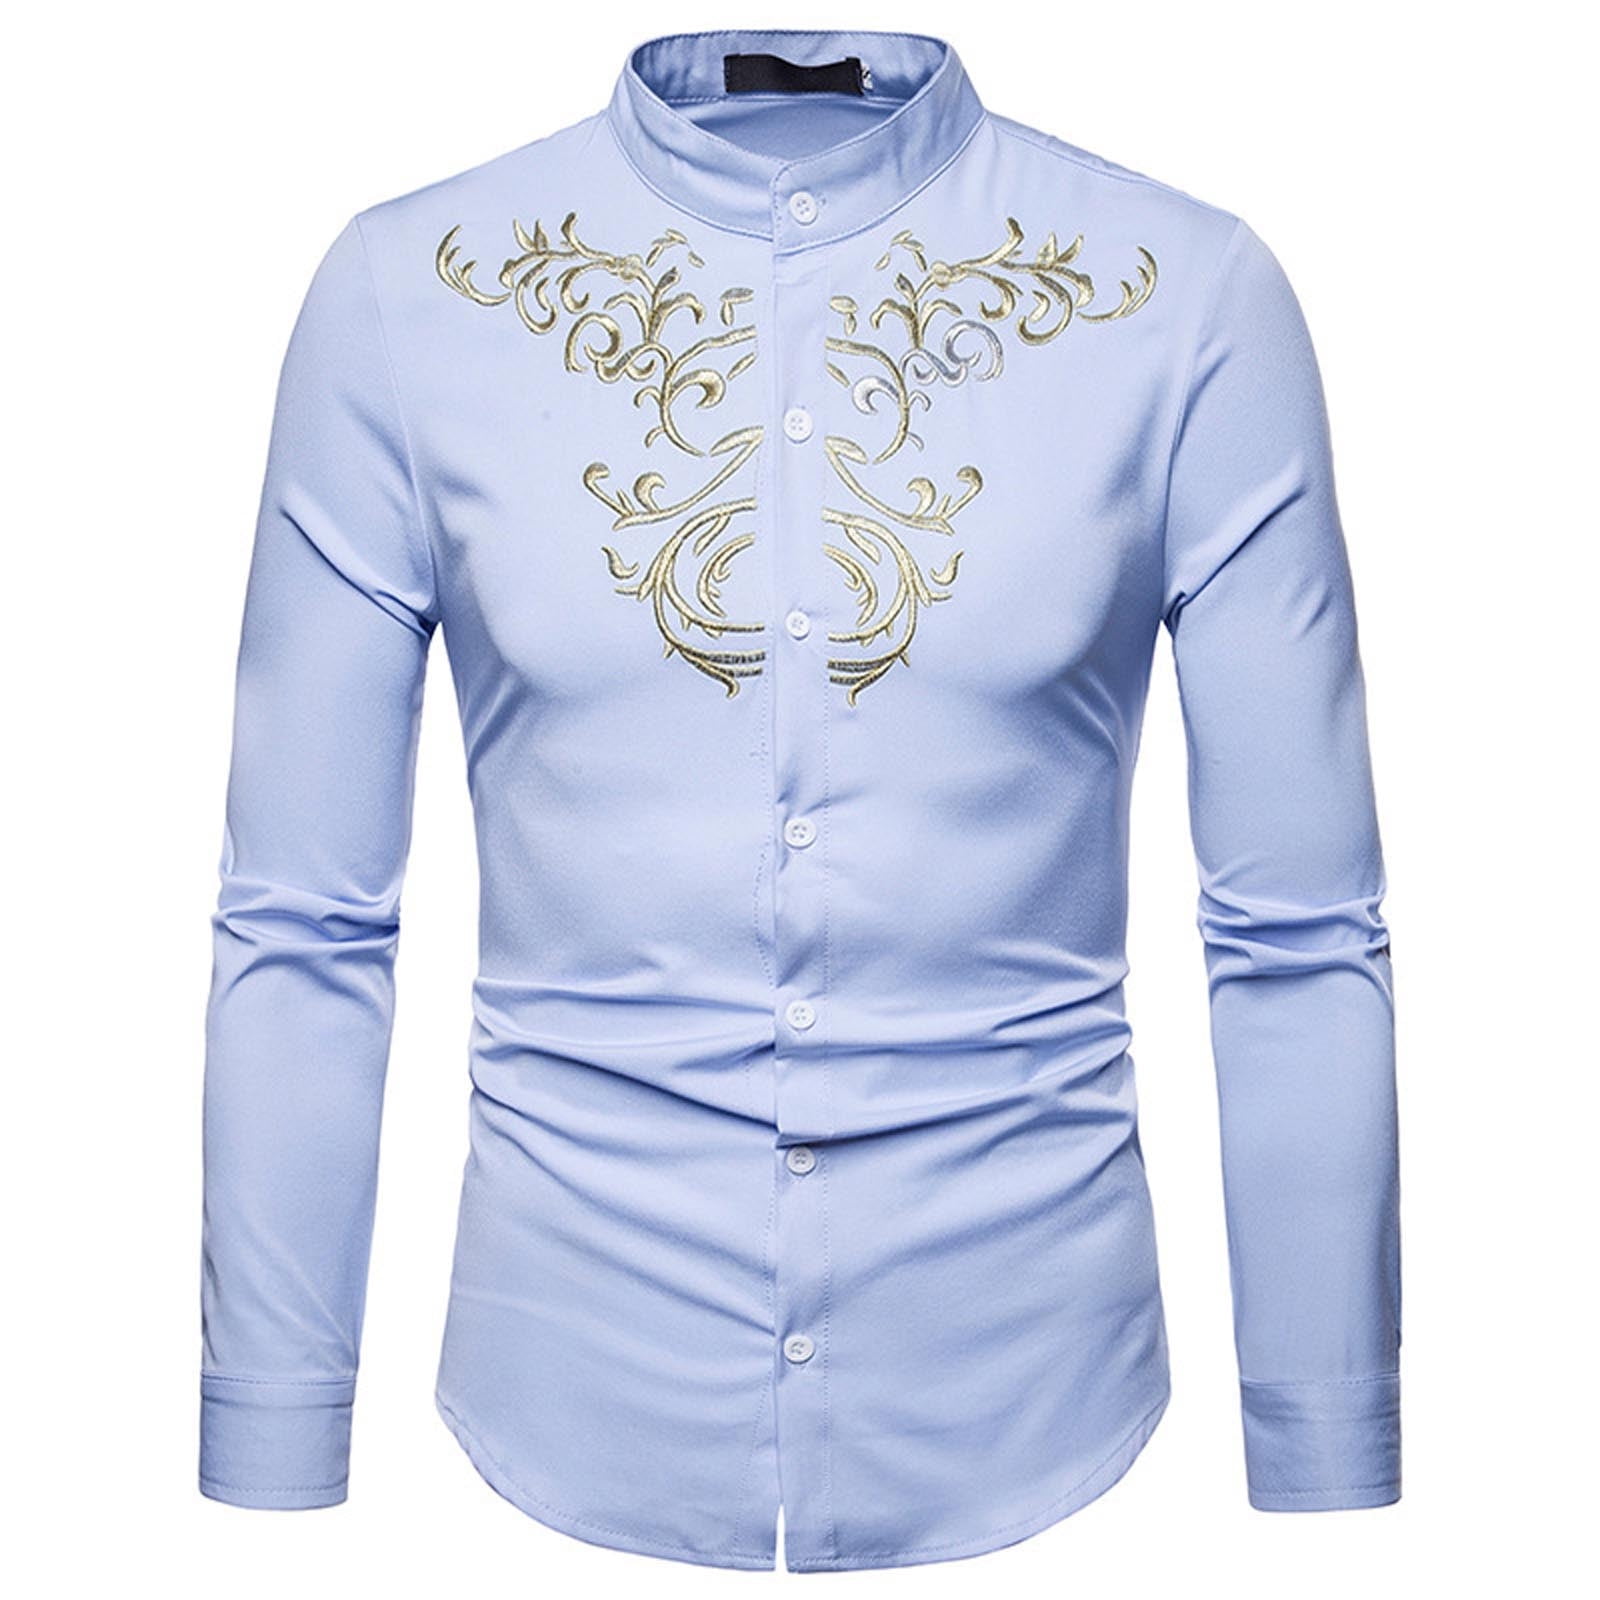 tklpehg Long Sleeve Tee Shirts for Men Casual Trendy Casual Floral  Embroidery Slim Fit Long Sleeve Band Collar Dress Shirts Light blue S